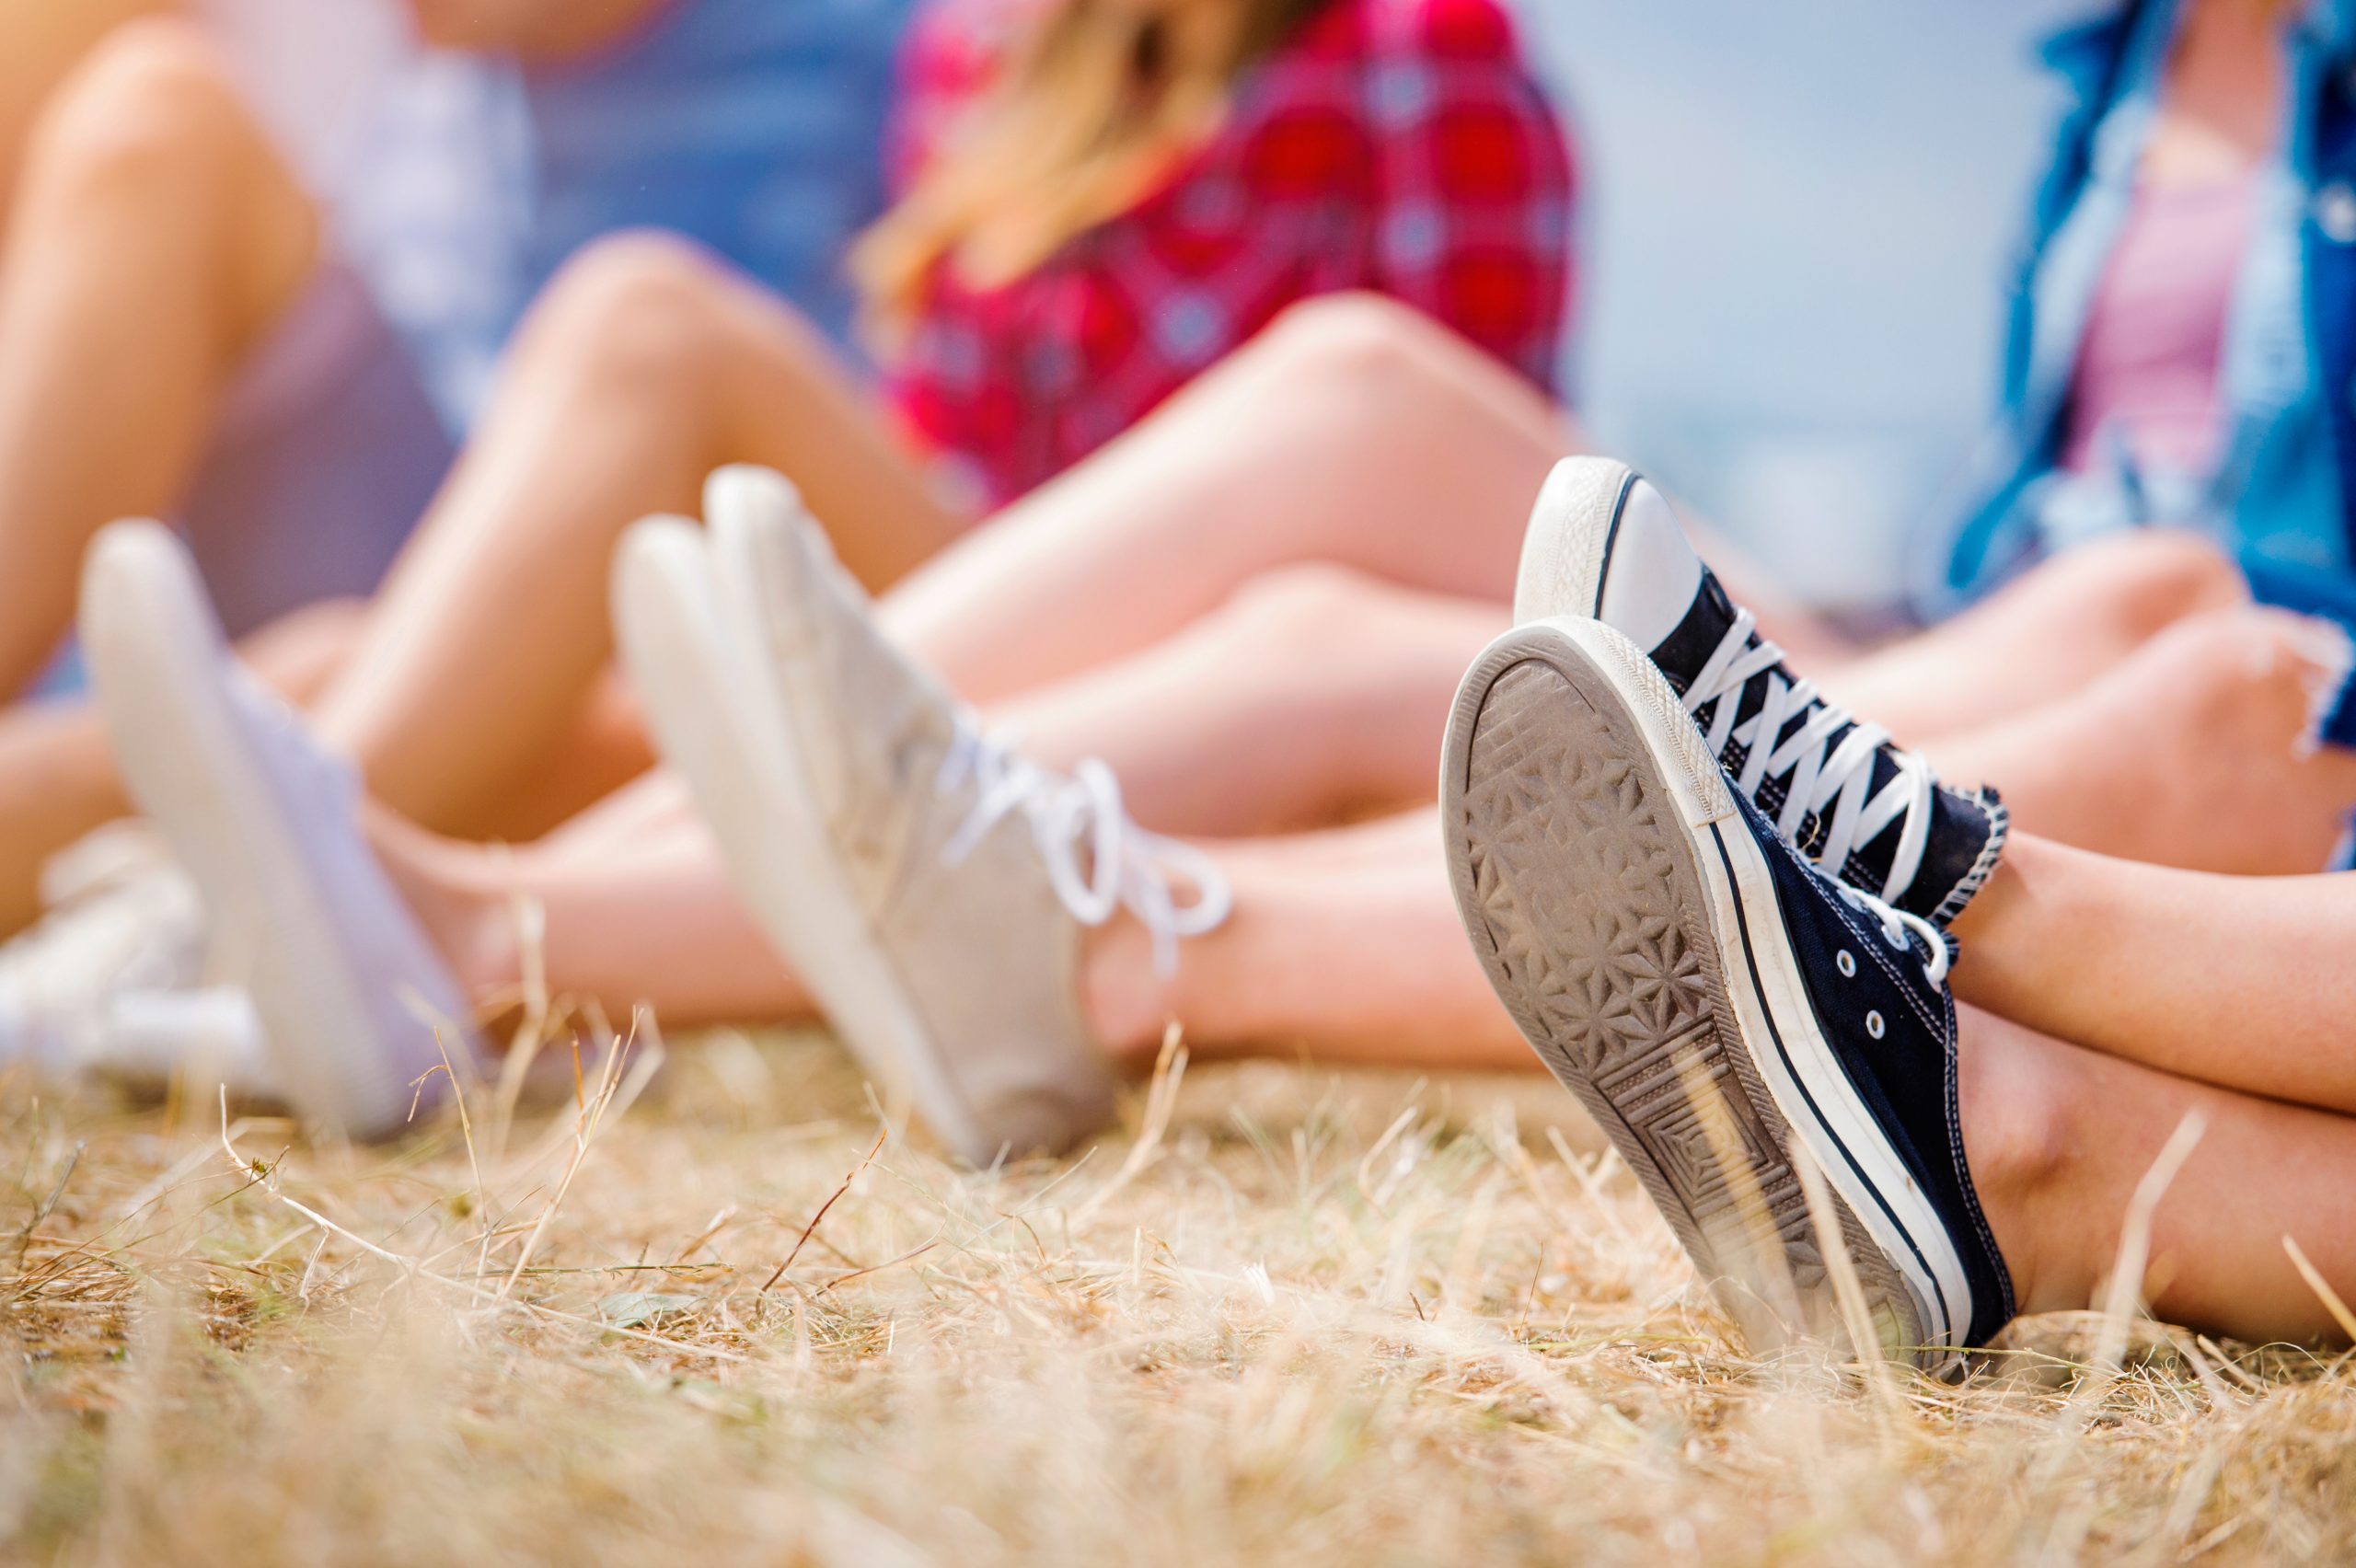 legs-of-teenagers-at-summer-music-festival-canvas-shoes-sitting-on-the-grass-in-front-SBI-305195361-scaled-1